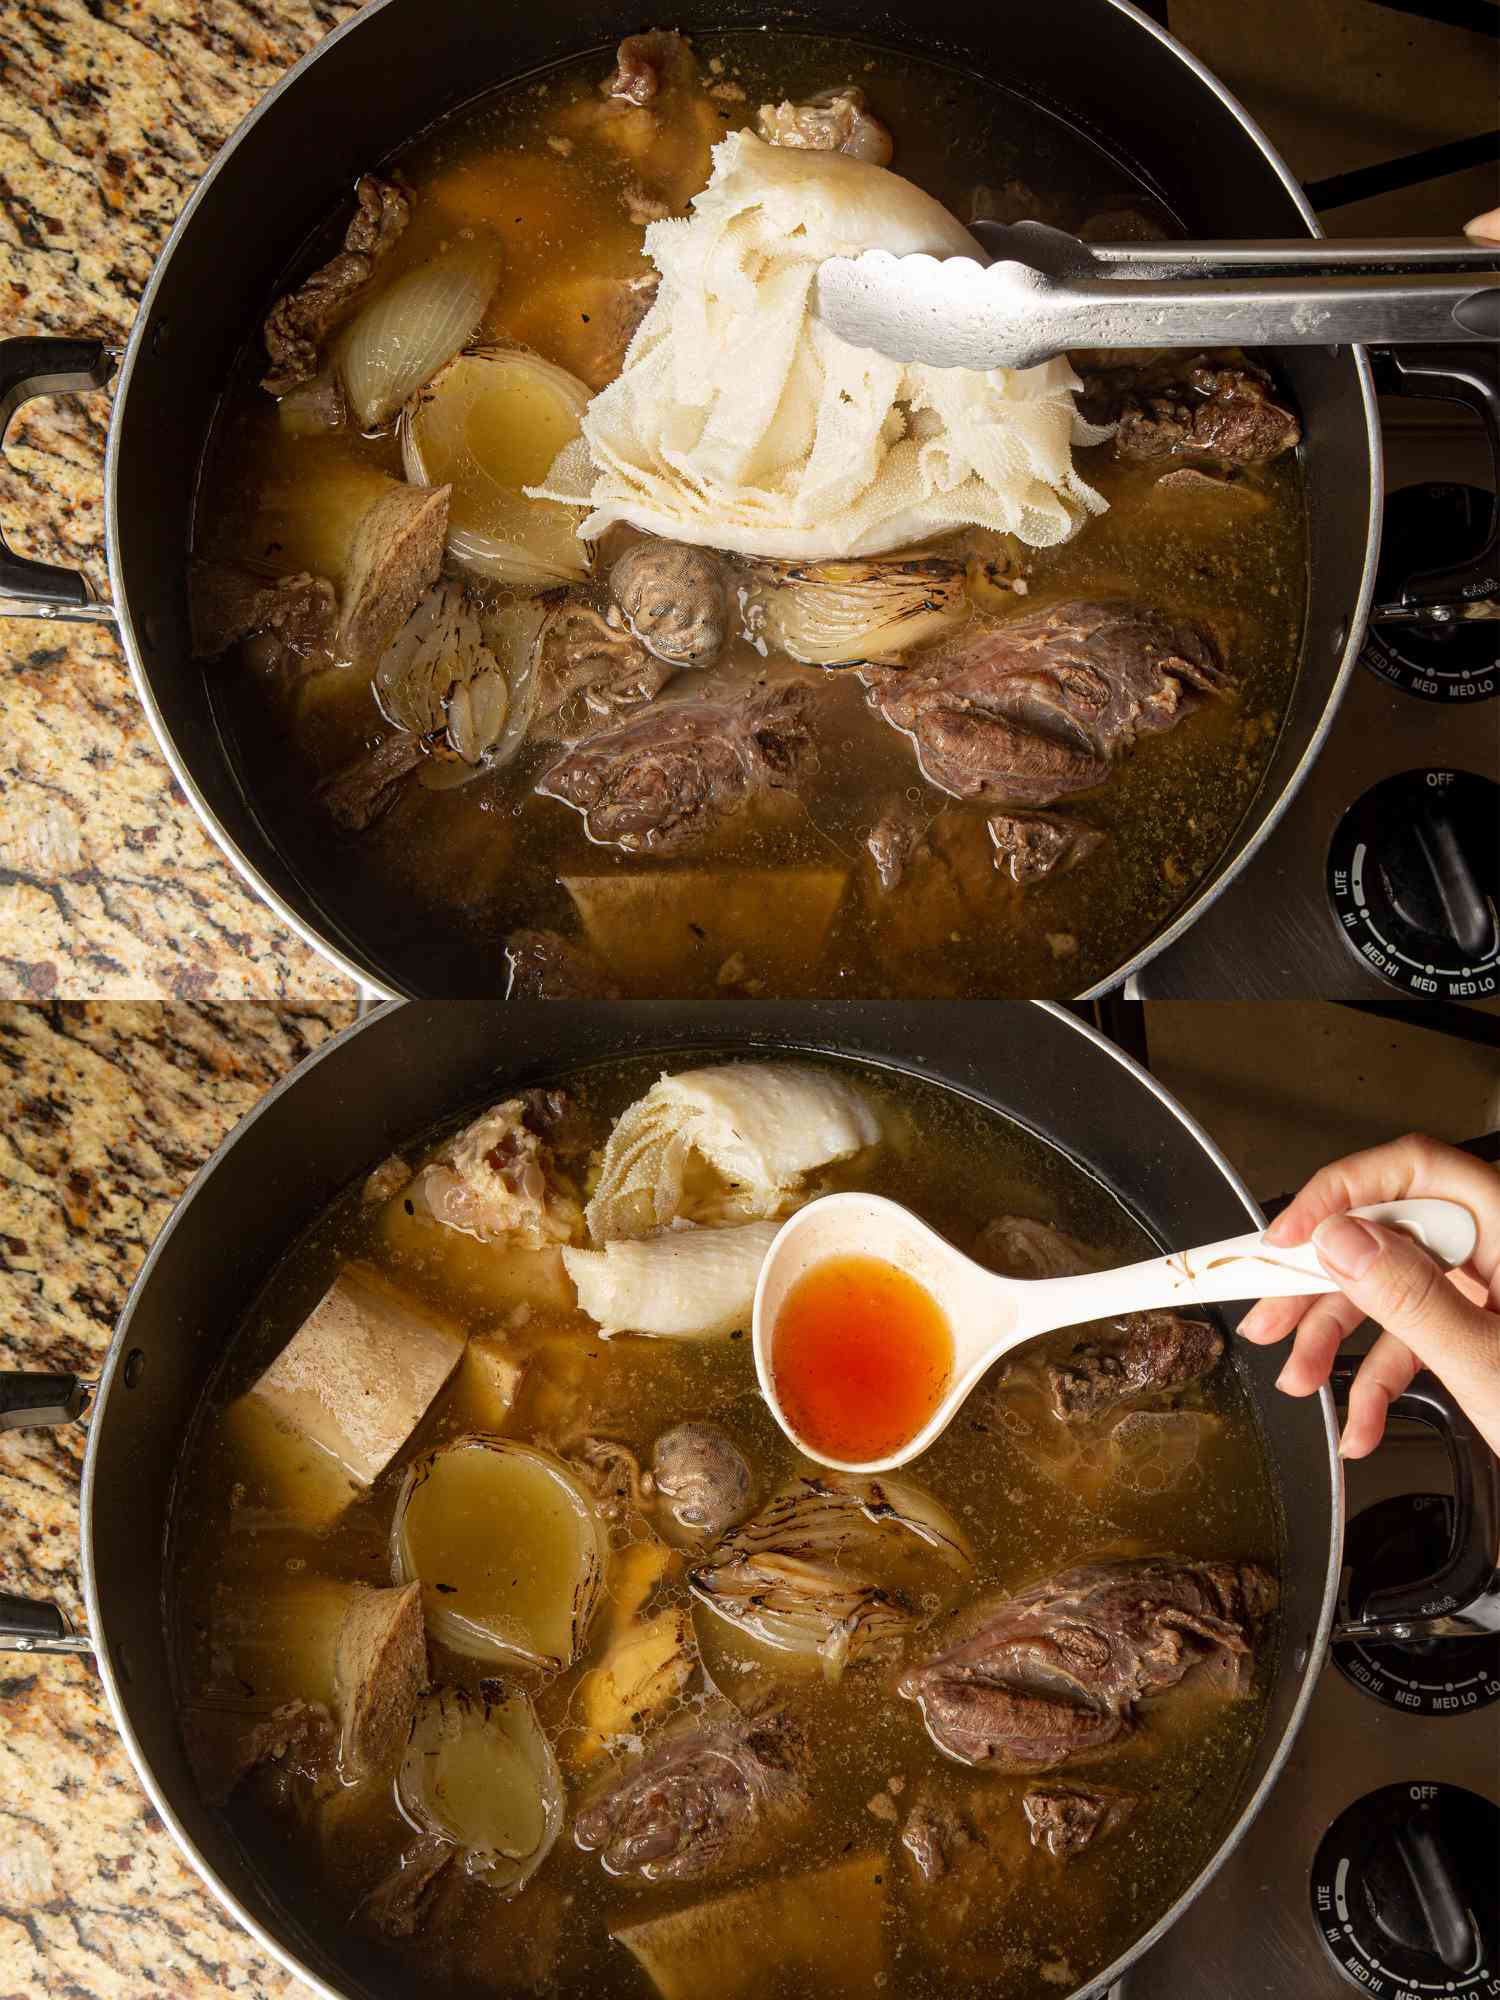 Two image collage of tripe and fish sauce being added to pot